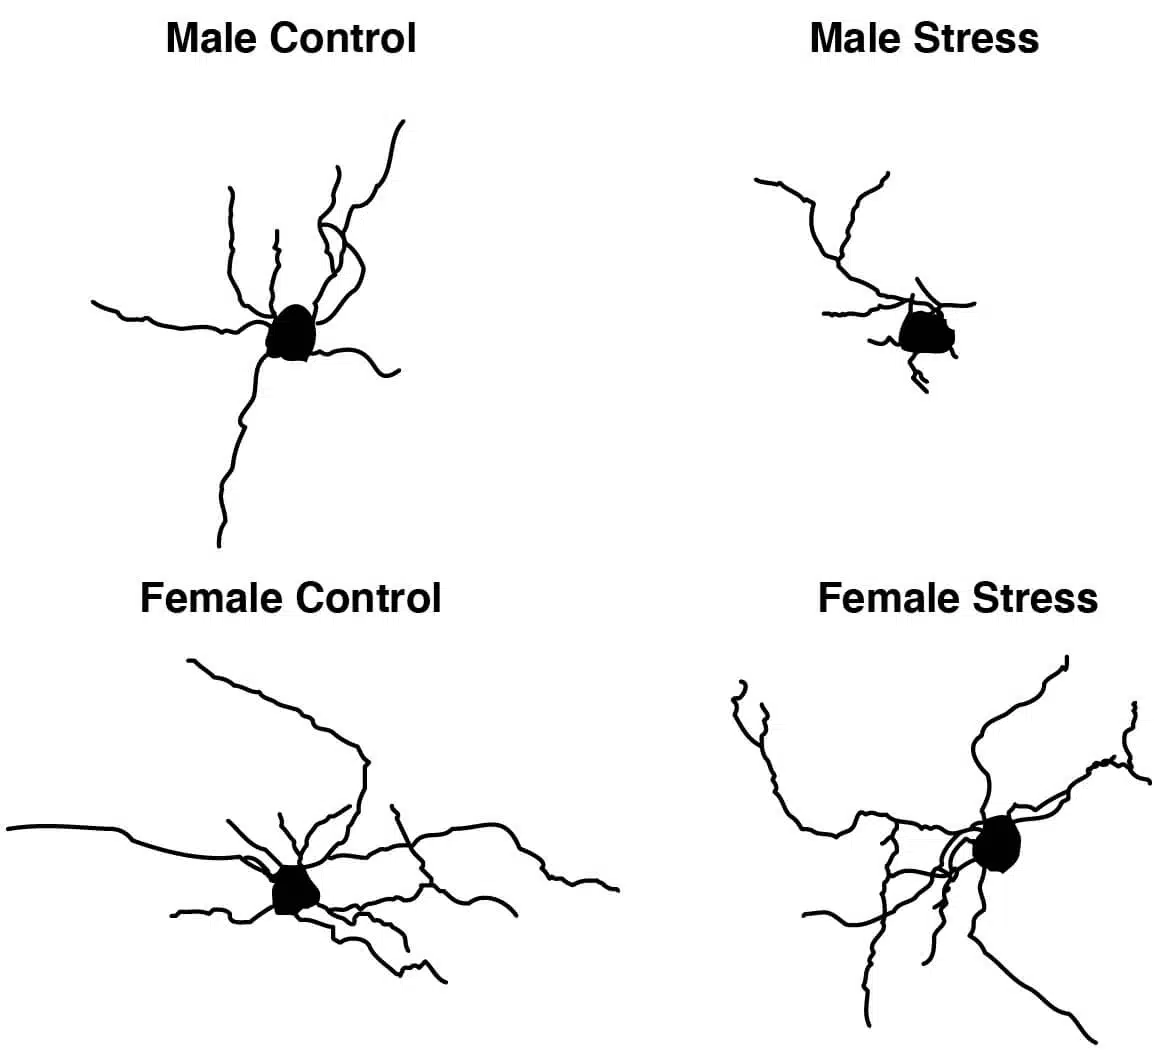 Schematic presentation demonstrating how the structure of an oligodendrocyte cell changes following exposure to stress in males (top row) but remains unchanged in females (bottom row)